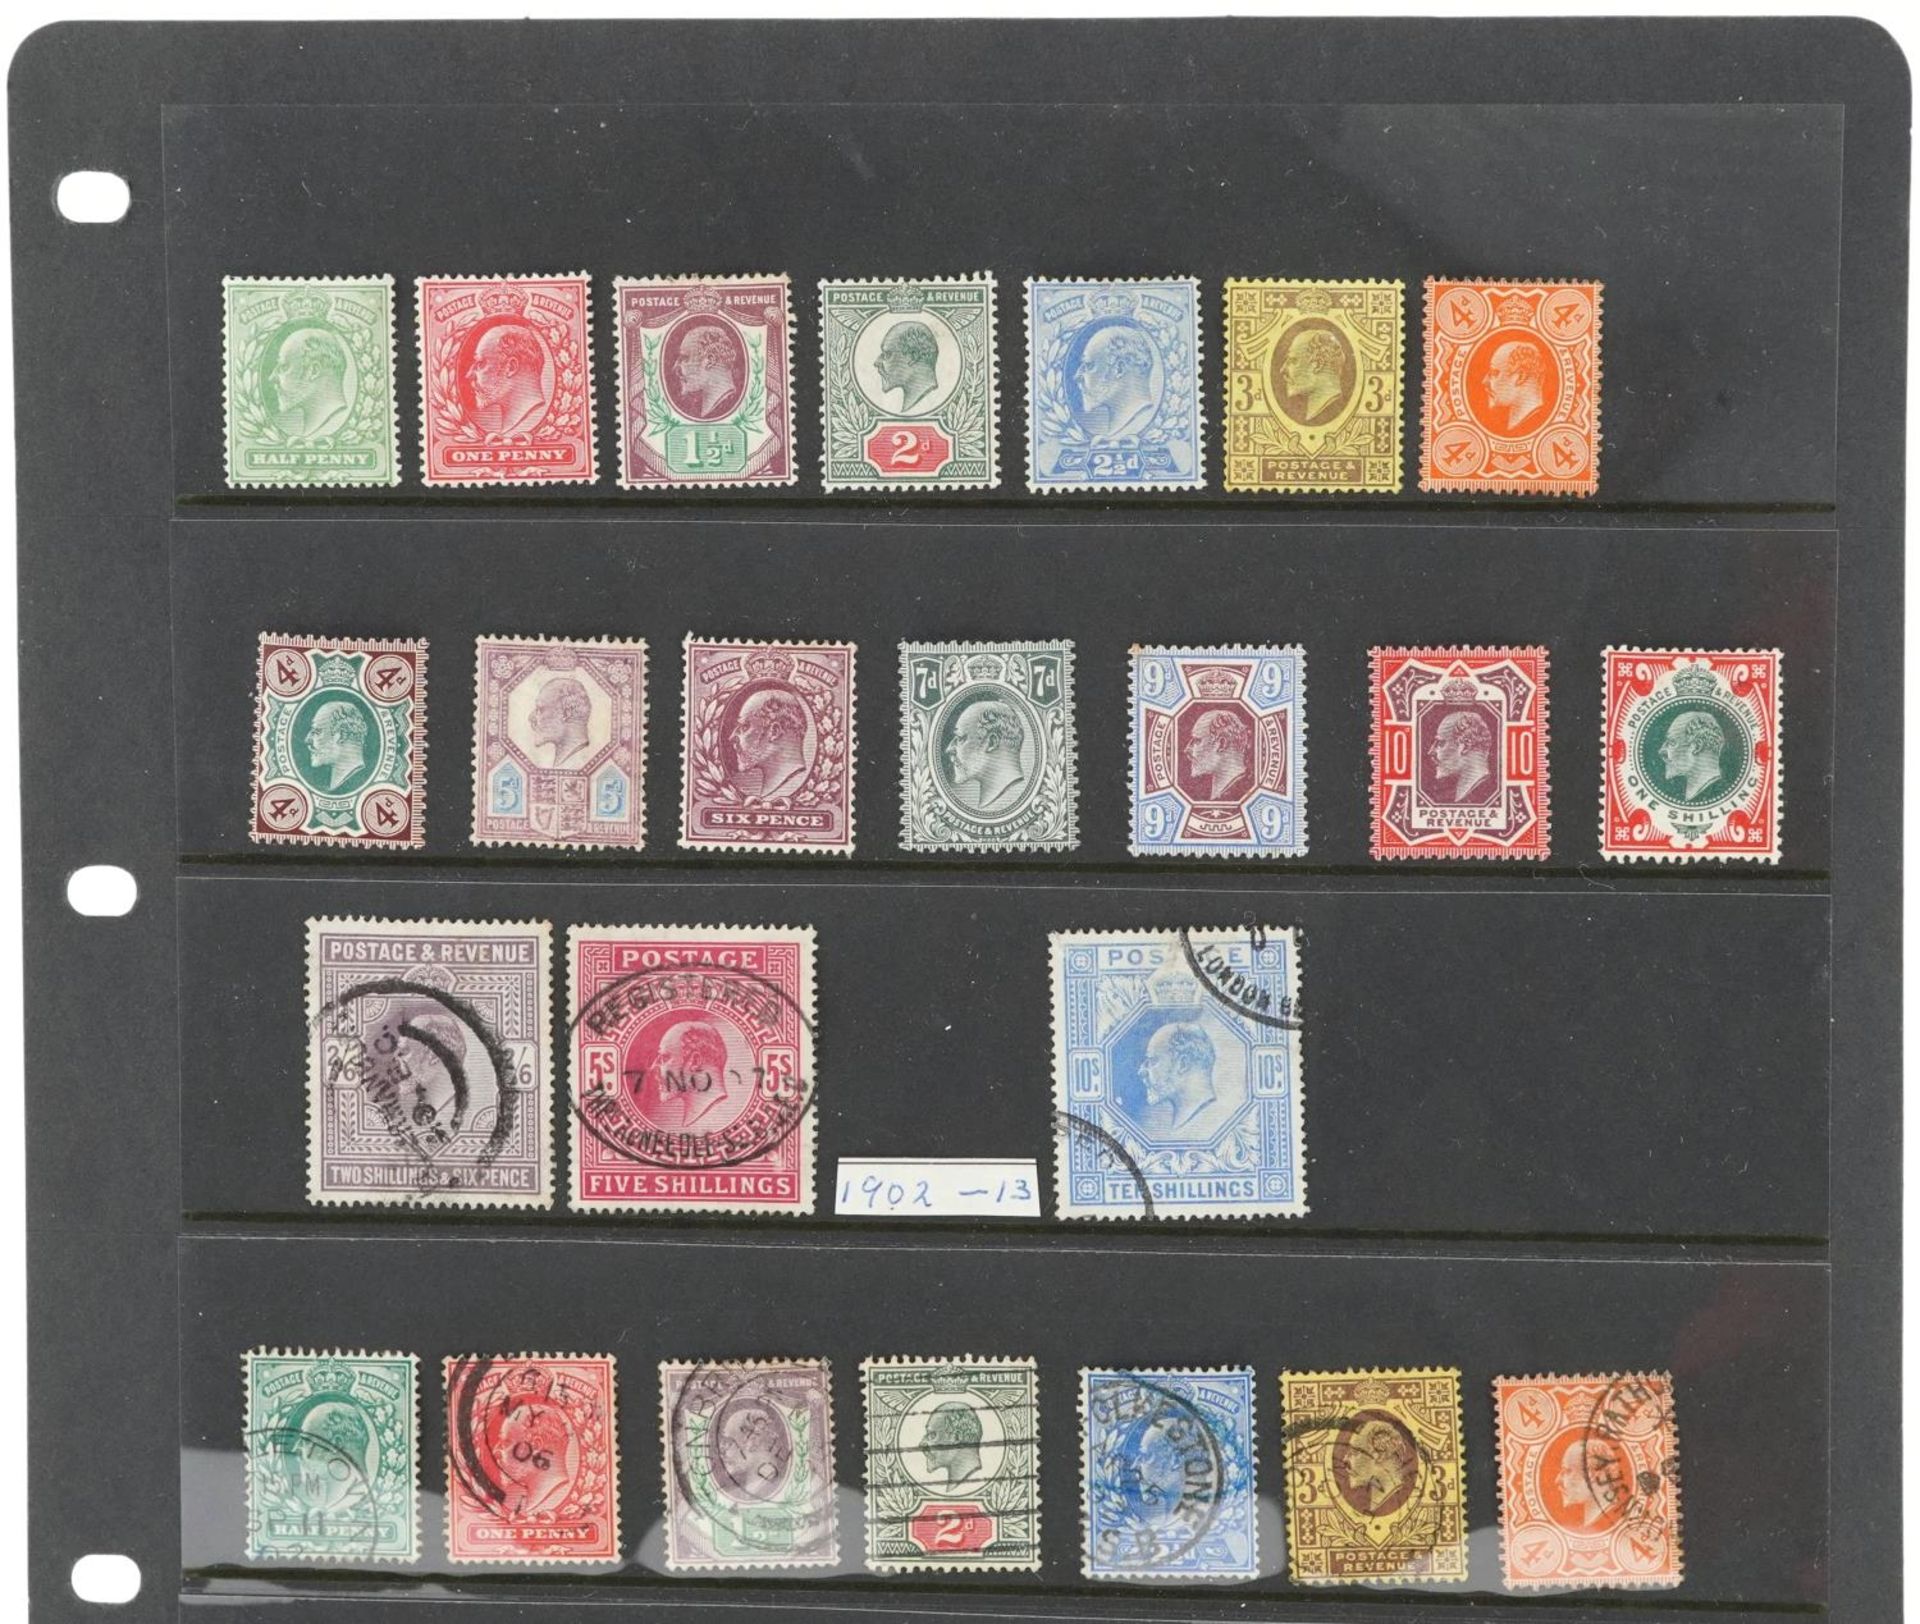 Edward VII British stamps arranged on a sheet including high values up to ten shillings, mint and - Bild 3 aus 4